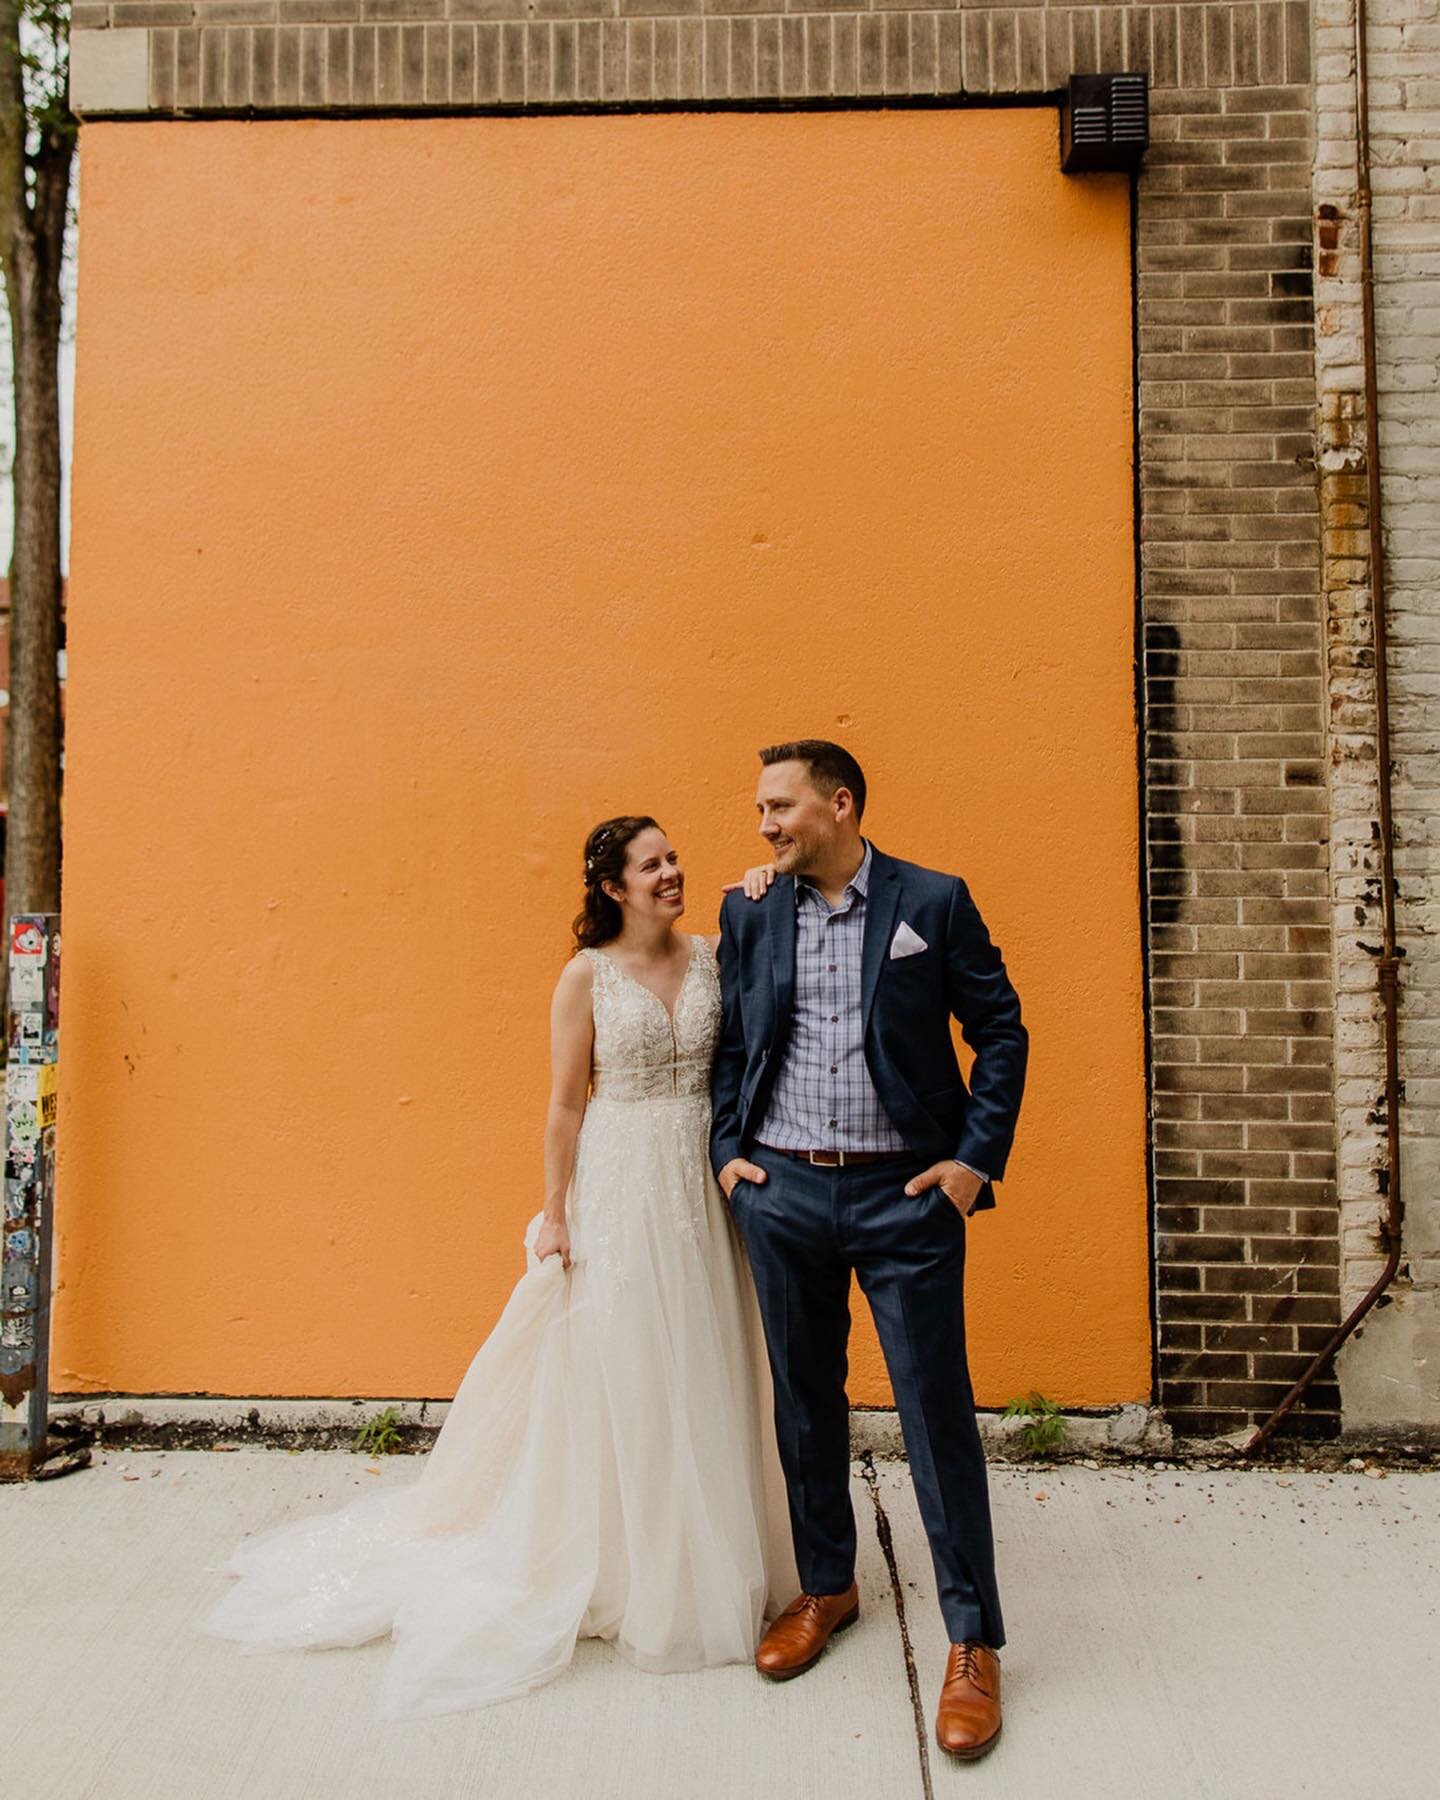 2021 was a year of unique ceremonies + locations. The shift to smaller weddings has been quite the delight and allows for a more personal experience in the documenting process. 

Roxy + Joe planned a small gathering at their new home in Milwaukee and